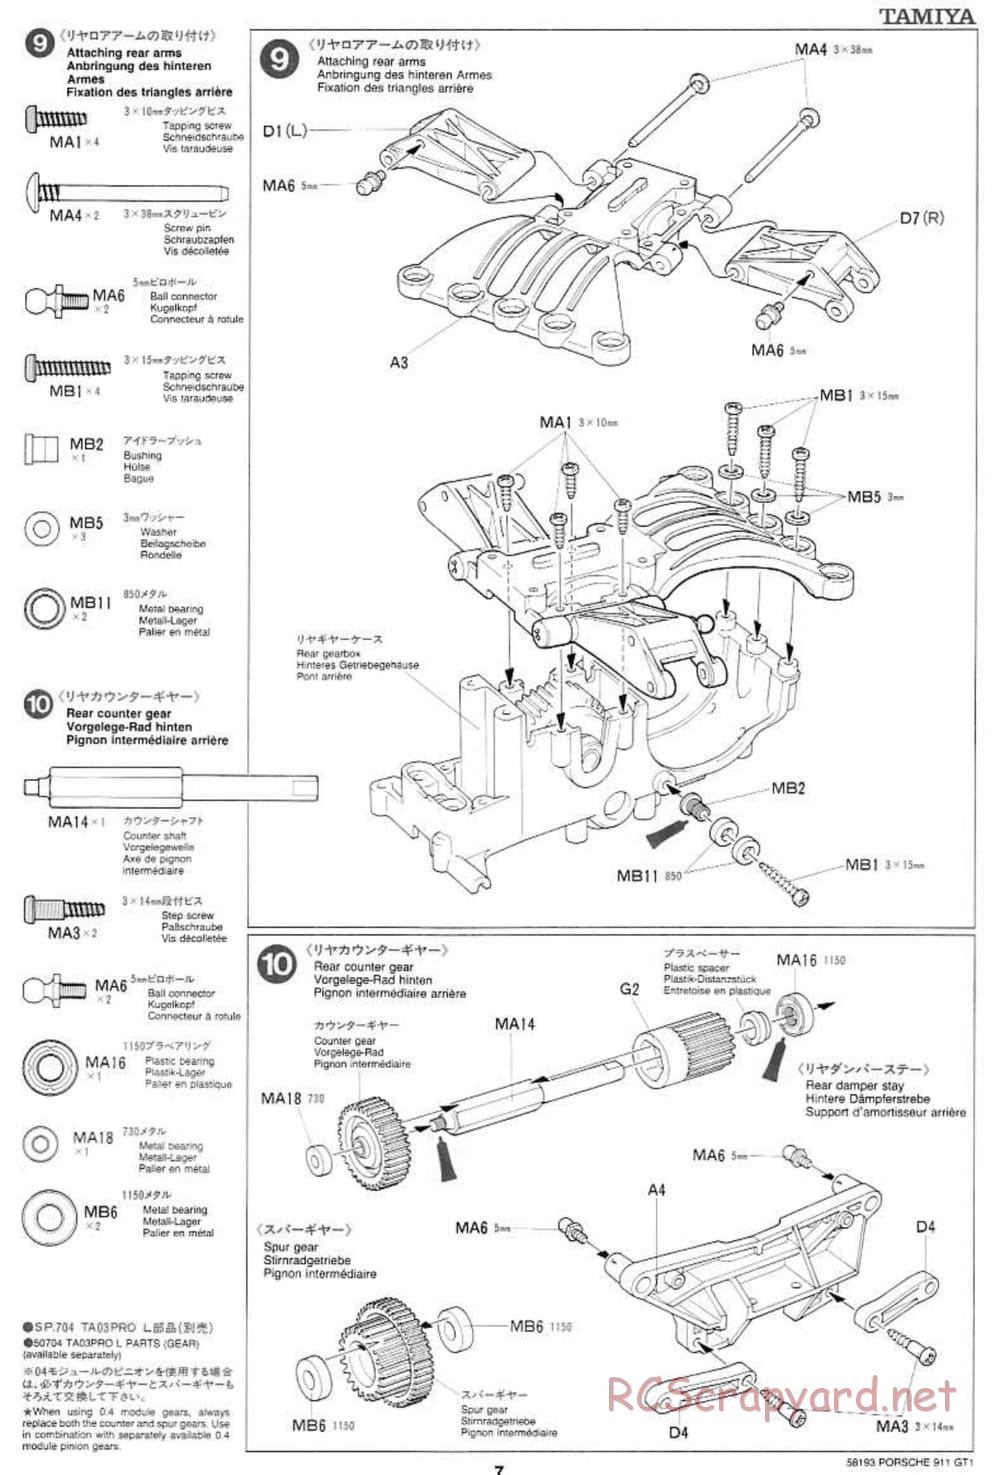 Tamiya - Porsche 911 GT1 - TA-03RS Chassis - Manual - Page 7